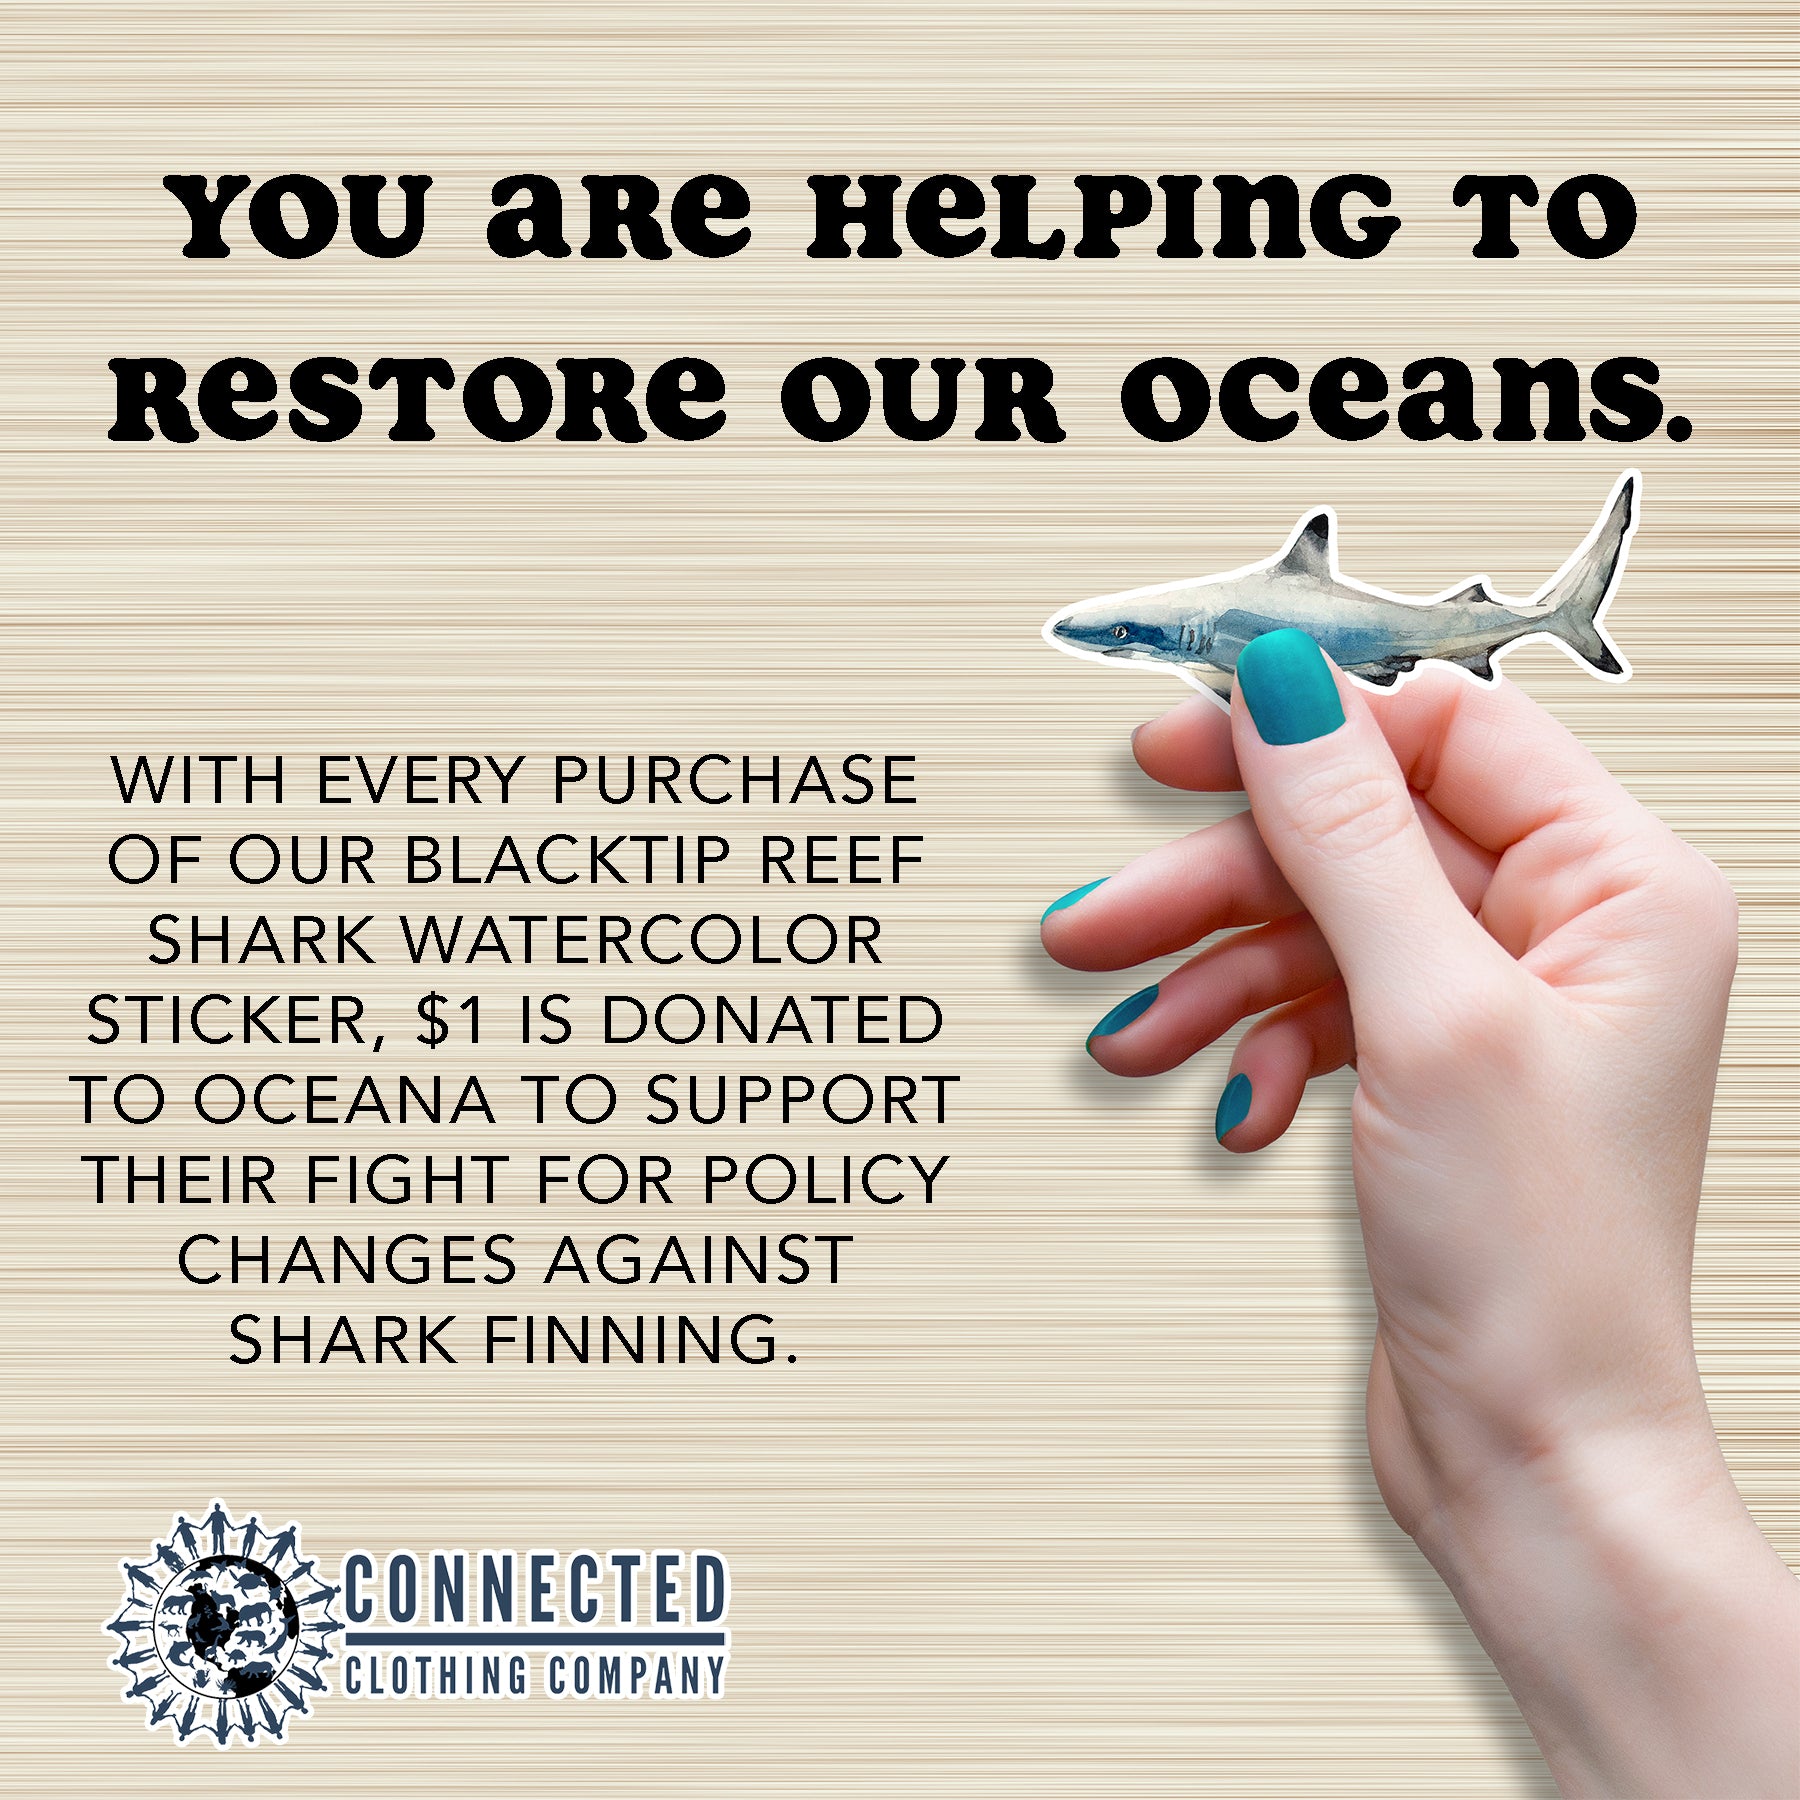 Hand Holding Reef Shark Watercolor Sticker - "You are helping to restore our oceans. With every purchase of our blacktip reef shark watercolor sticker, $1 is donated to oceana to support their fight for policy changes against shark finning." - Connected Clothing Company - Ethical and Sustainable Apparel - portion of profits donated to shark conservation